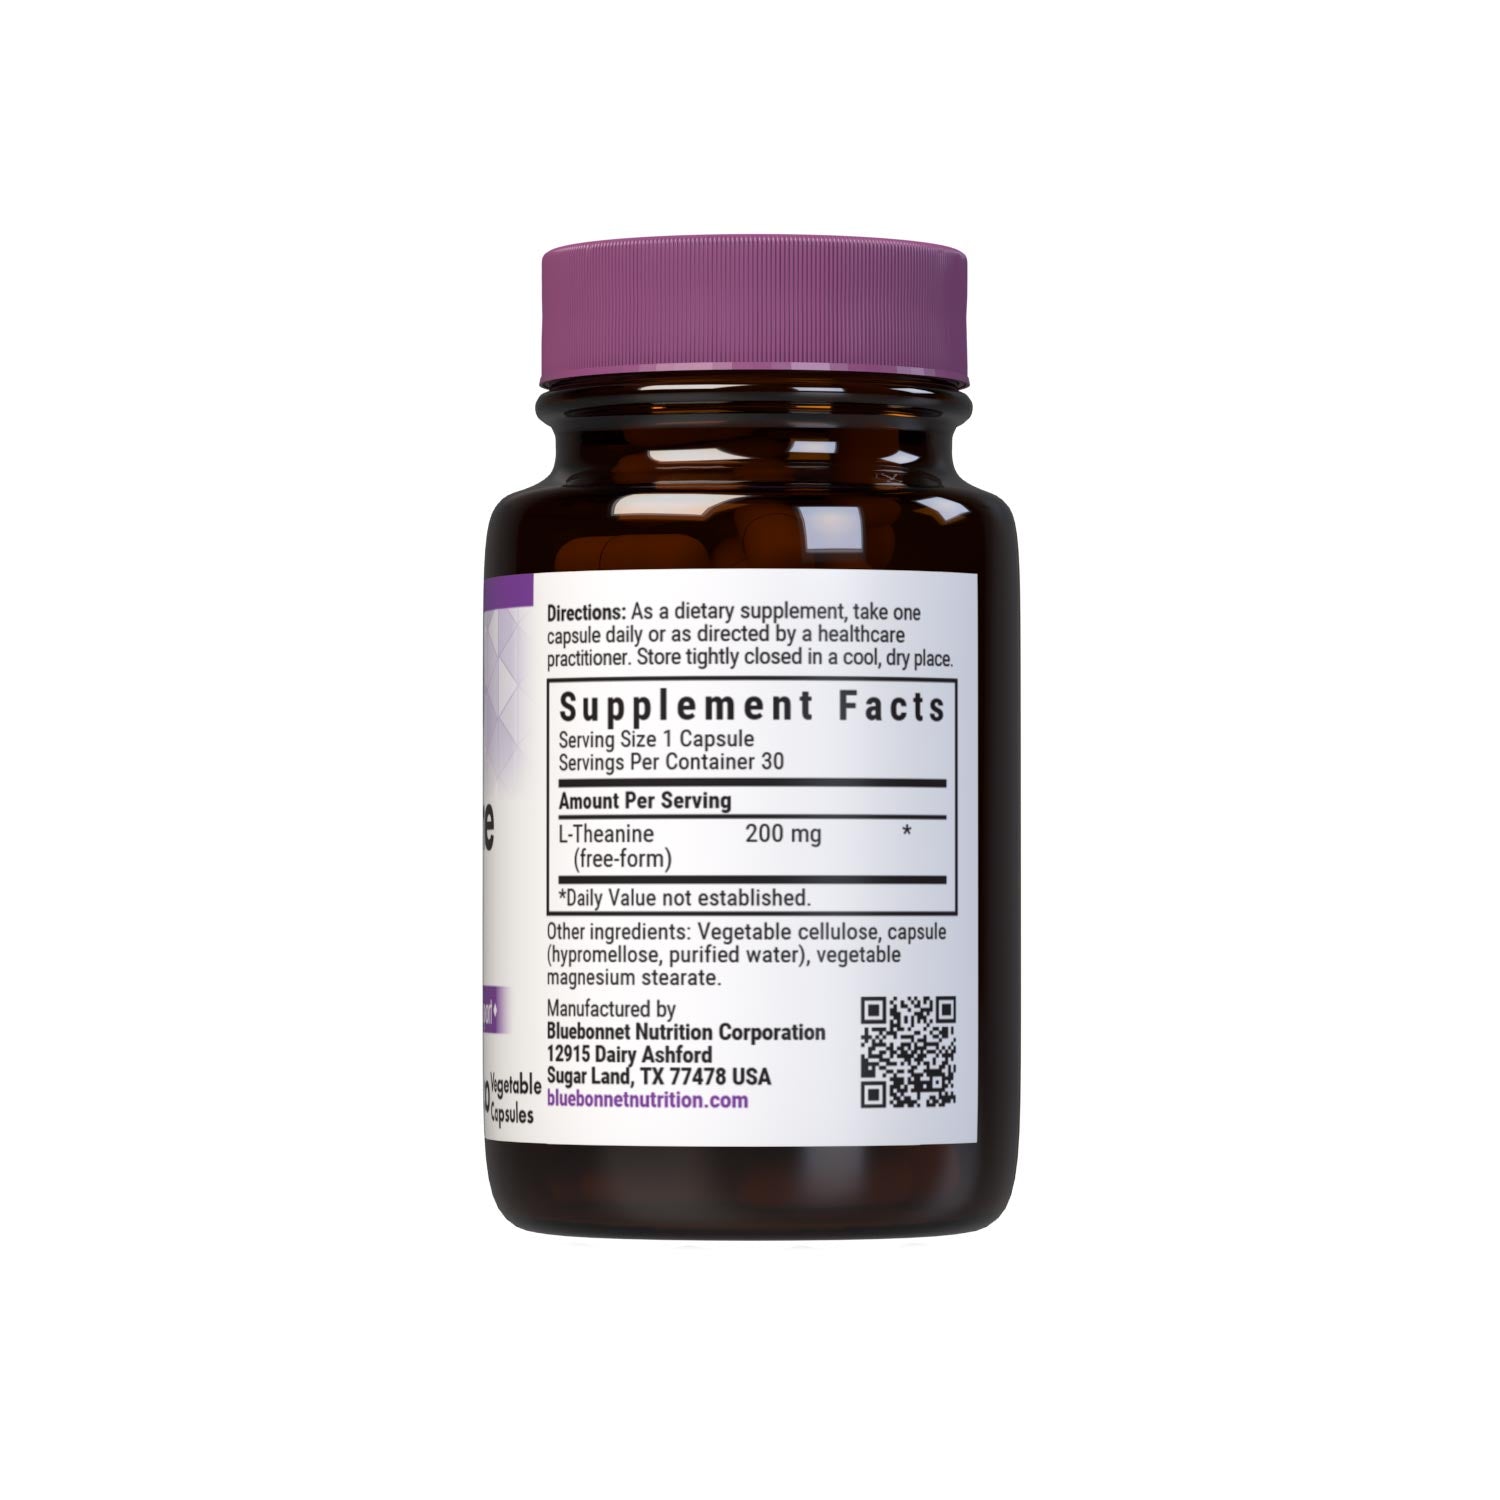 Bluebonnet L-Theanine 200 mg 30 Vegetable Capsules are formulated with the free-form amino acid L-theanine in its crystalline form, which may improve memory and learning as well as support an overall sense of relaxation. Supplement facts panel. #size_30 count